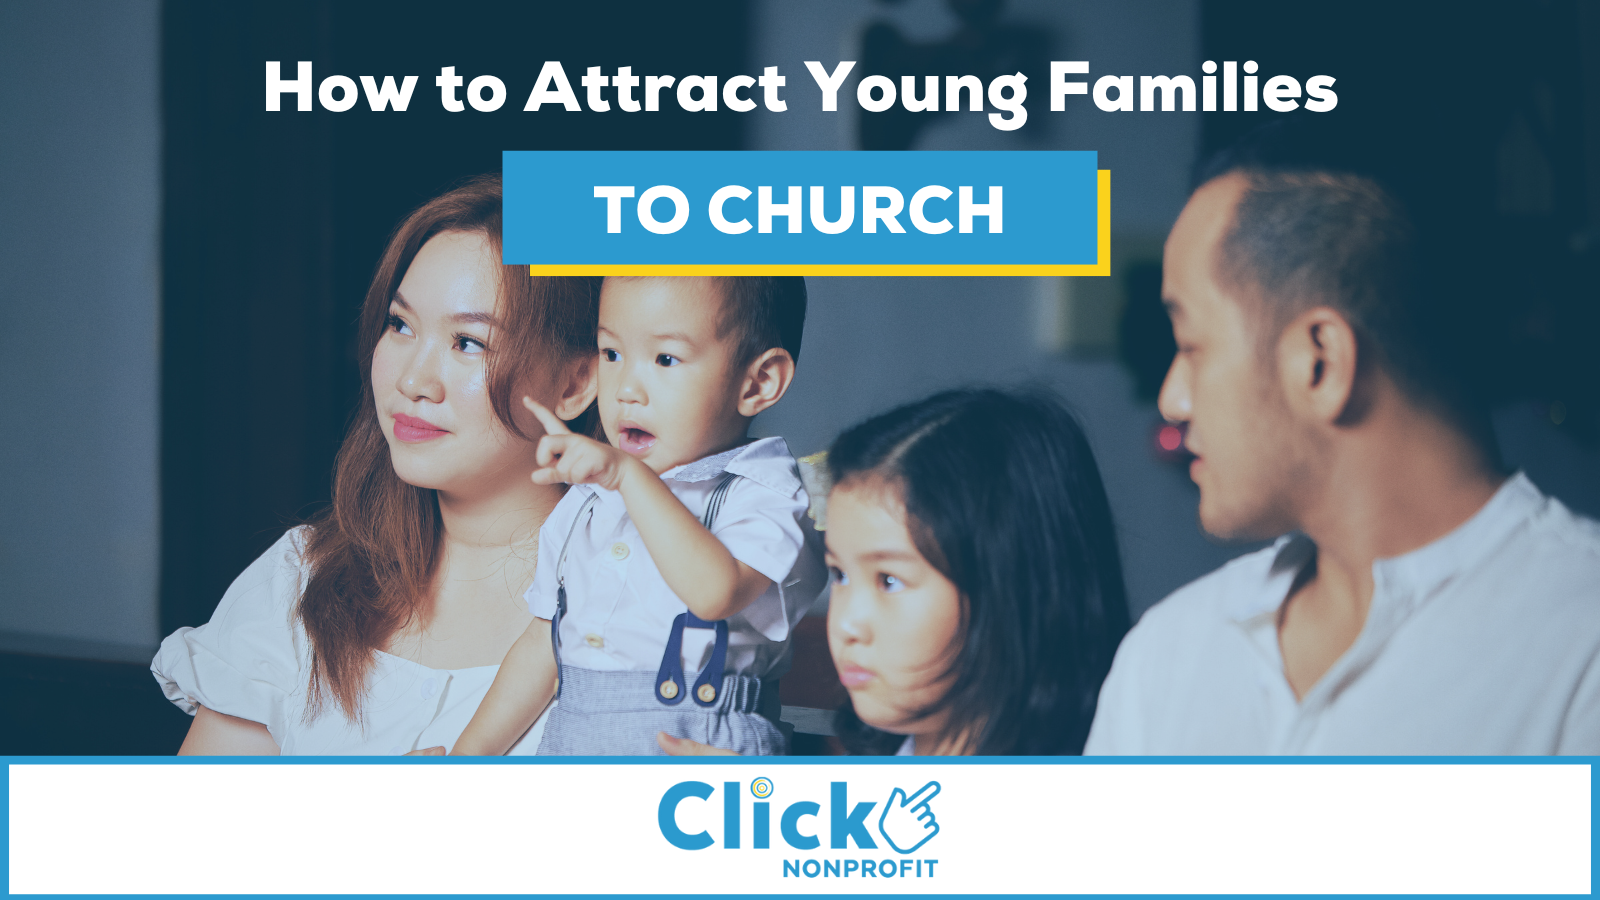 How to Attract young families to church